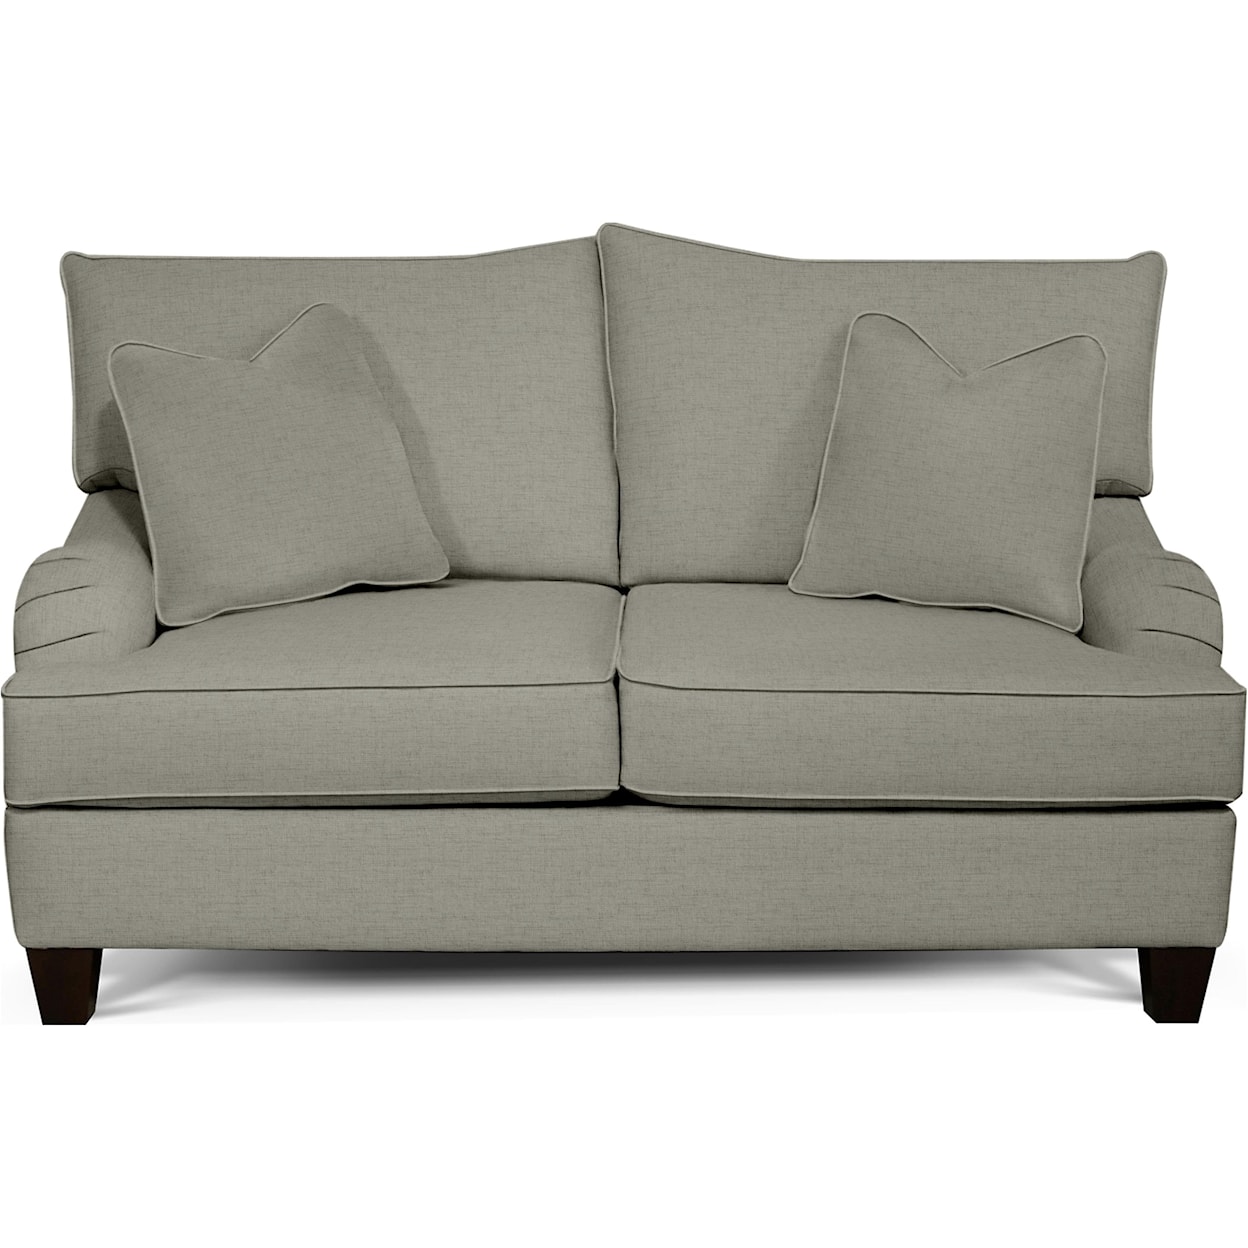 England 6350 Series Whitley Loveseat